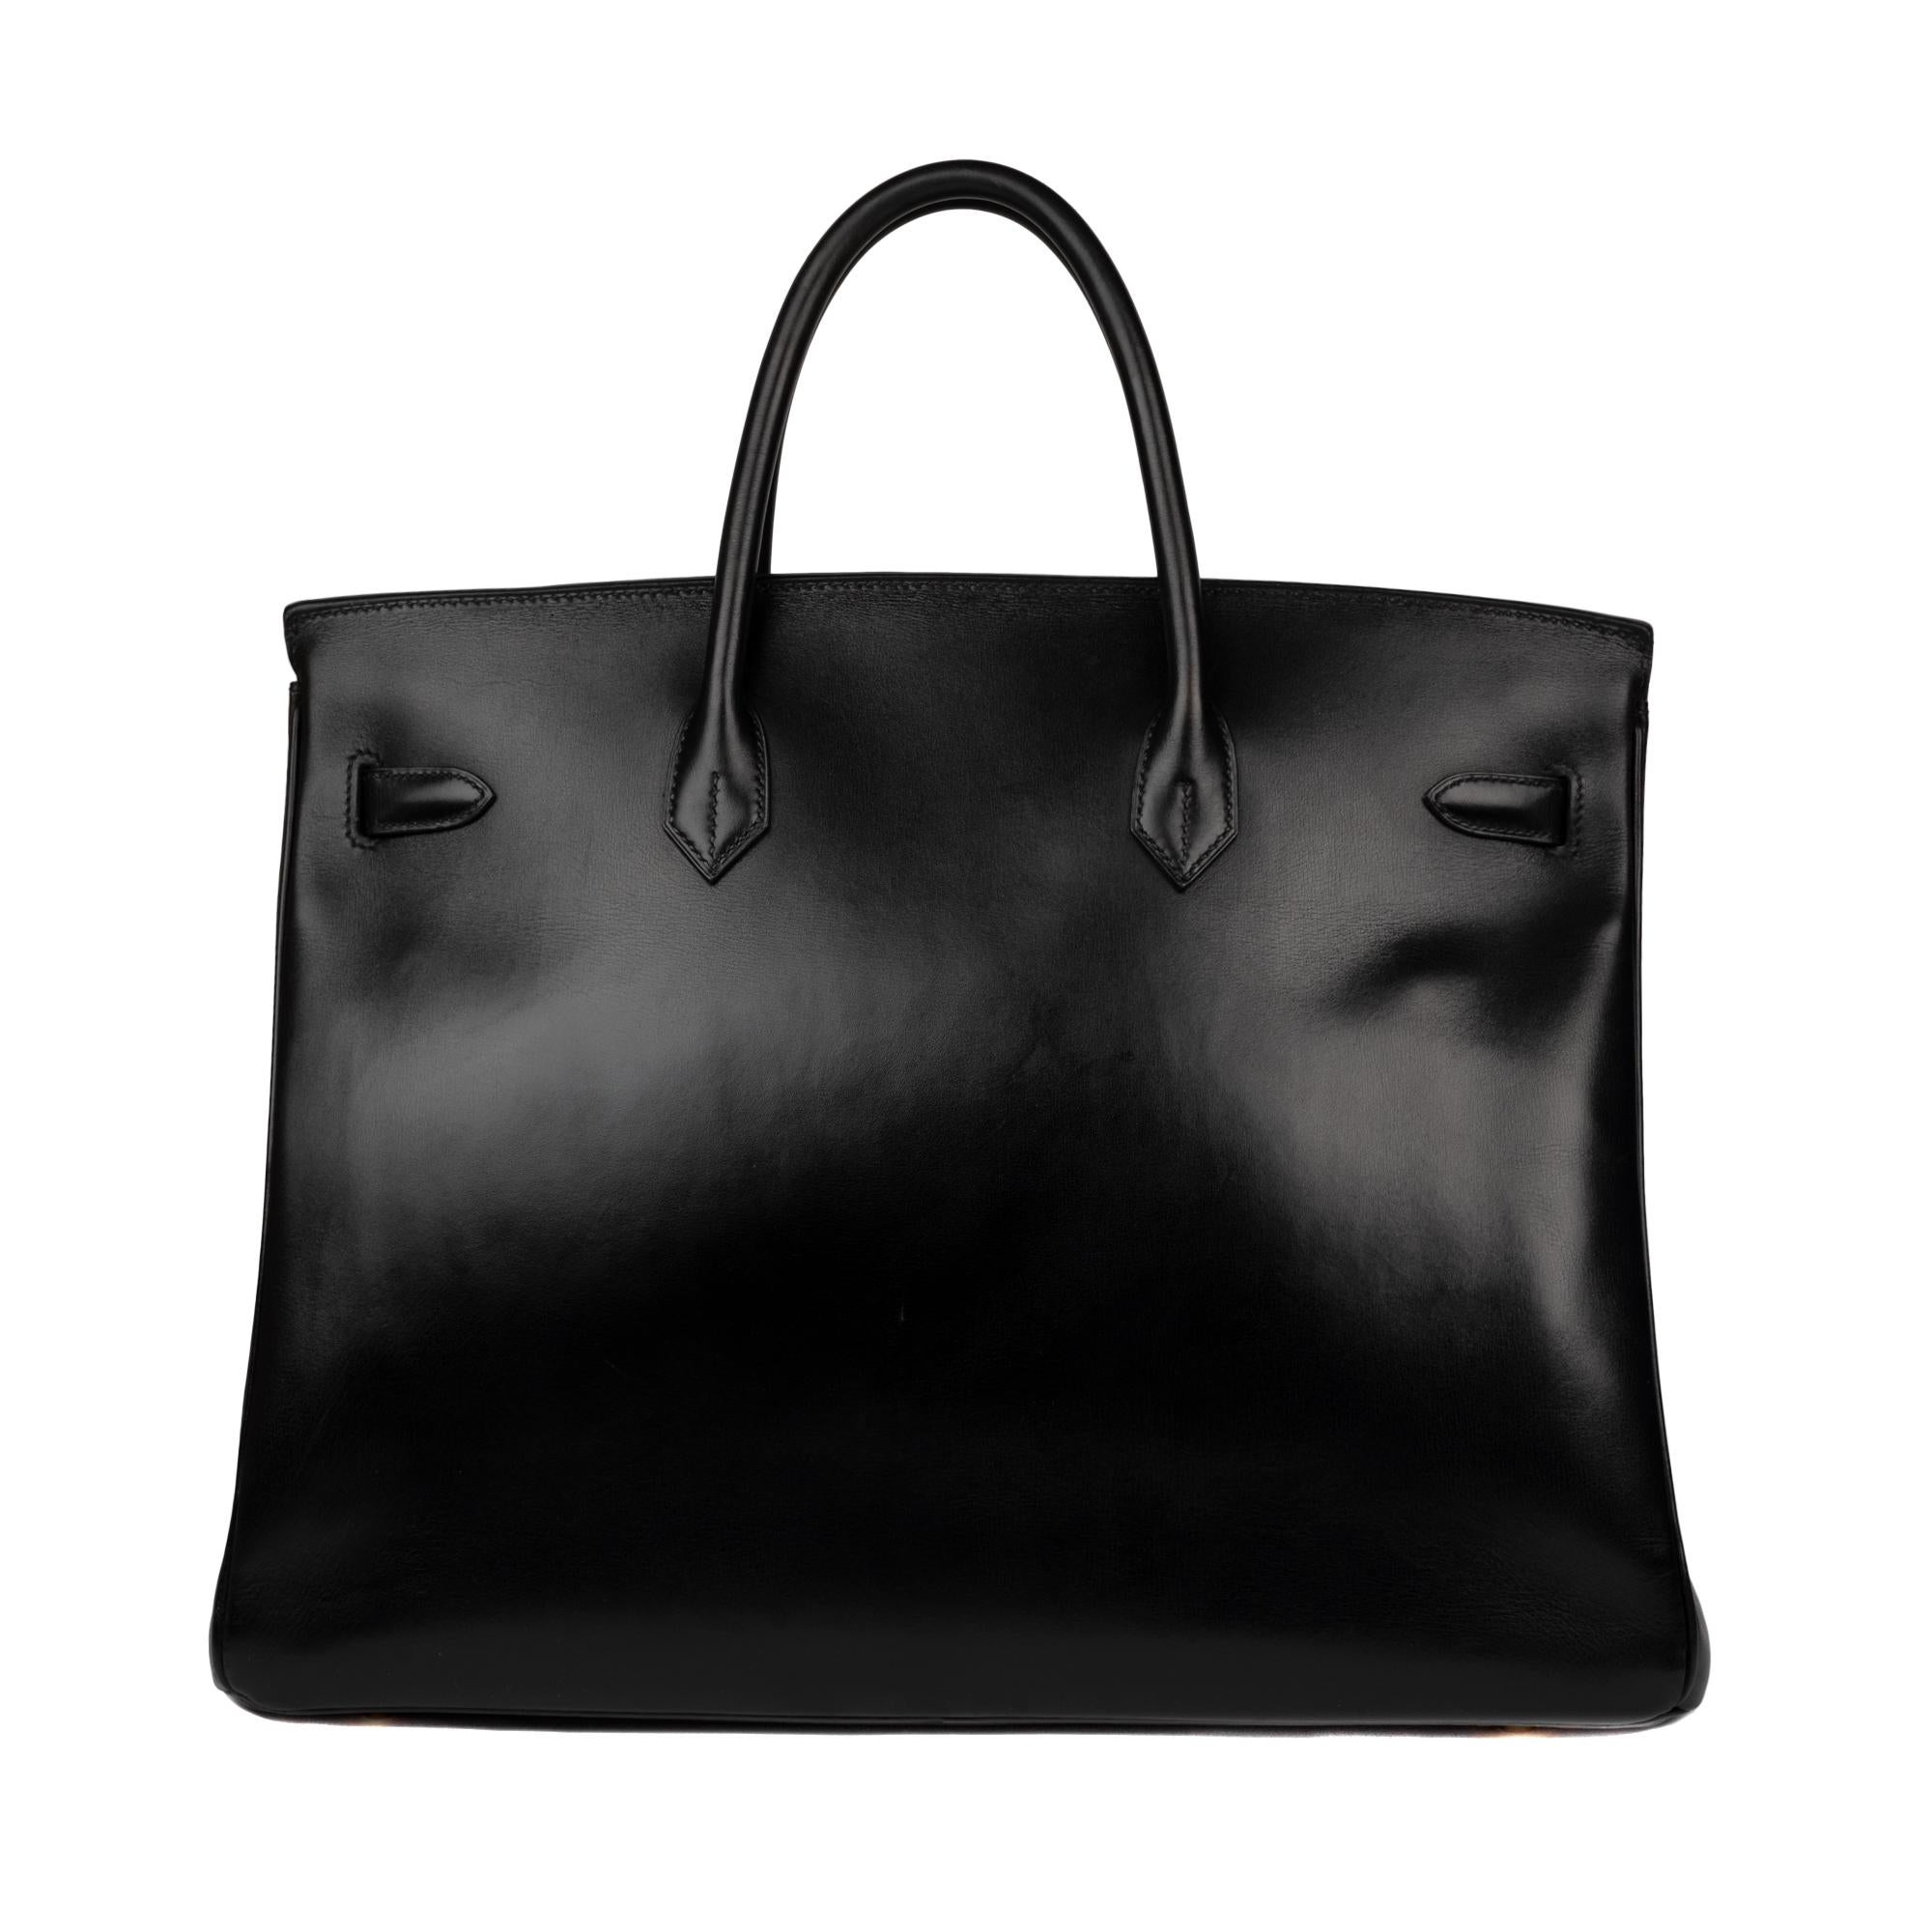 Exceptional Hermes Birkin bag 40 cm black box leather, gold plated metal trim, lined black leather handle allowing a hand carried. Flap closure. Black leather lining, une poche zippée, a patch pocket. Dimensions: 40 * 31 *20
 Signature: 